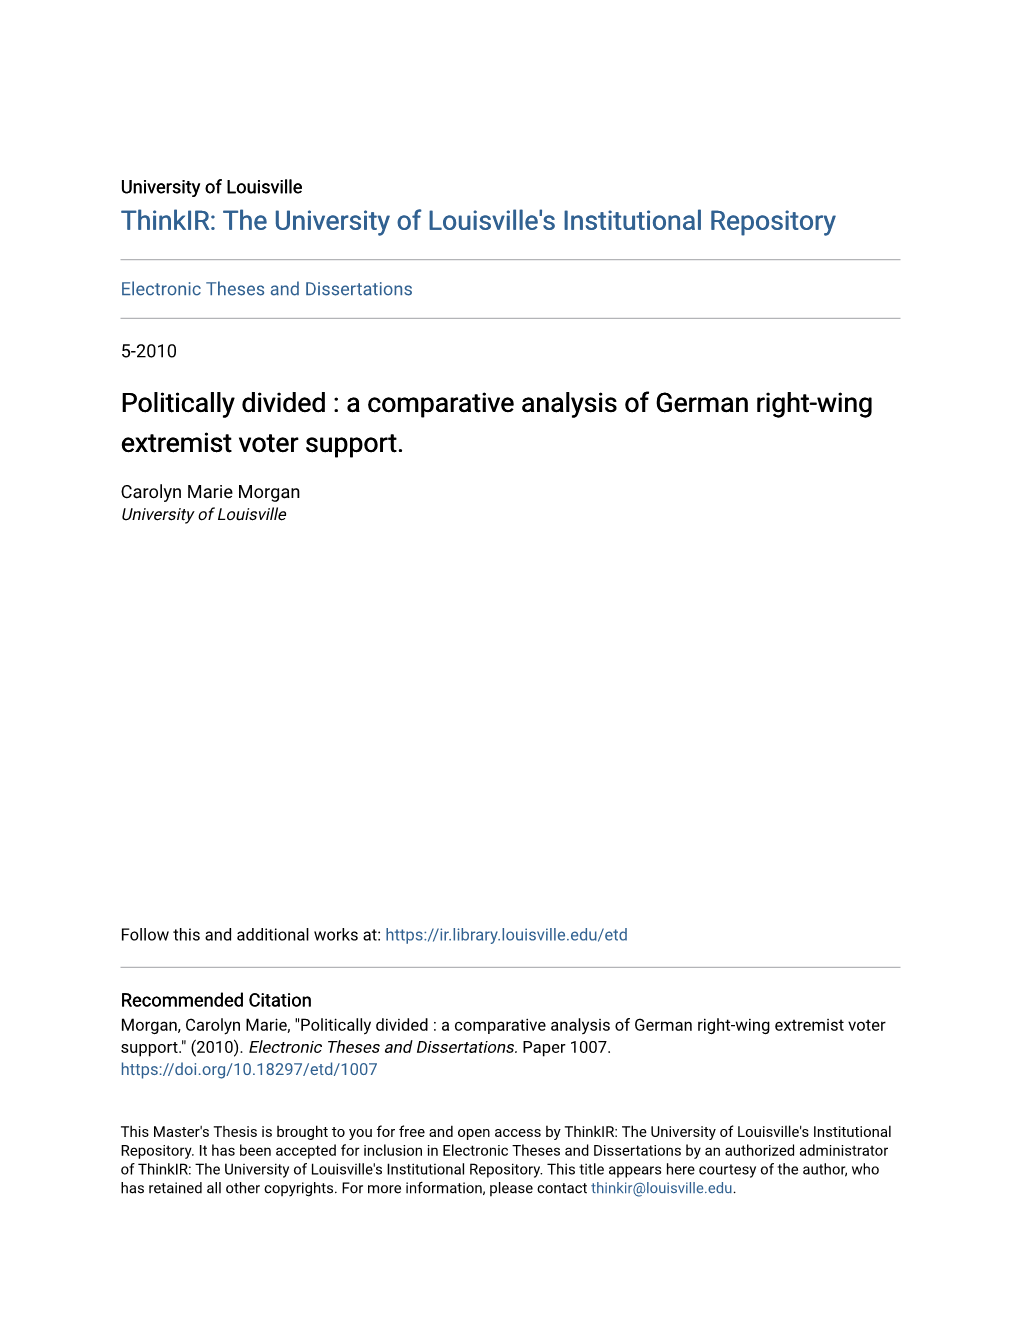 Politically Divided : a Comparative Analysis of German Right-Wing Extremist Voter Support